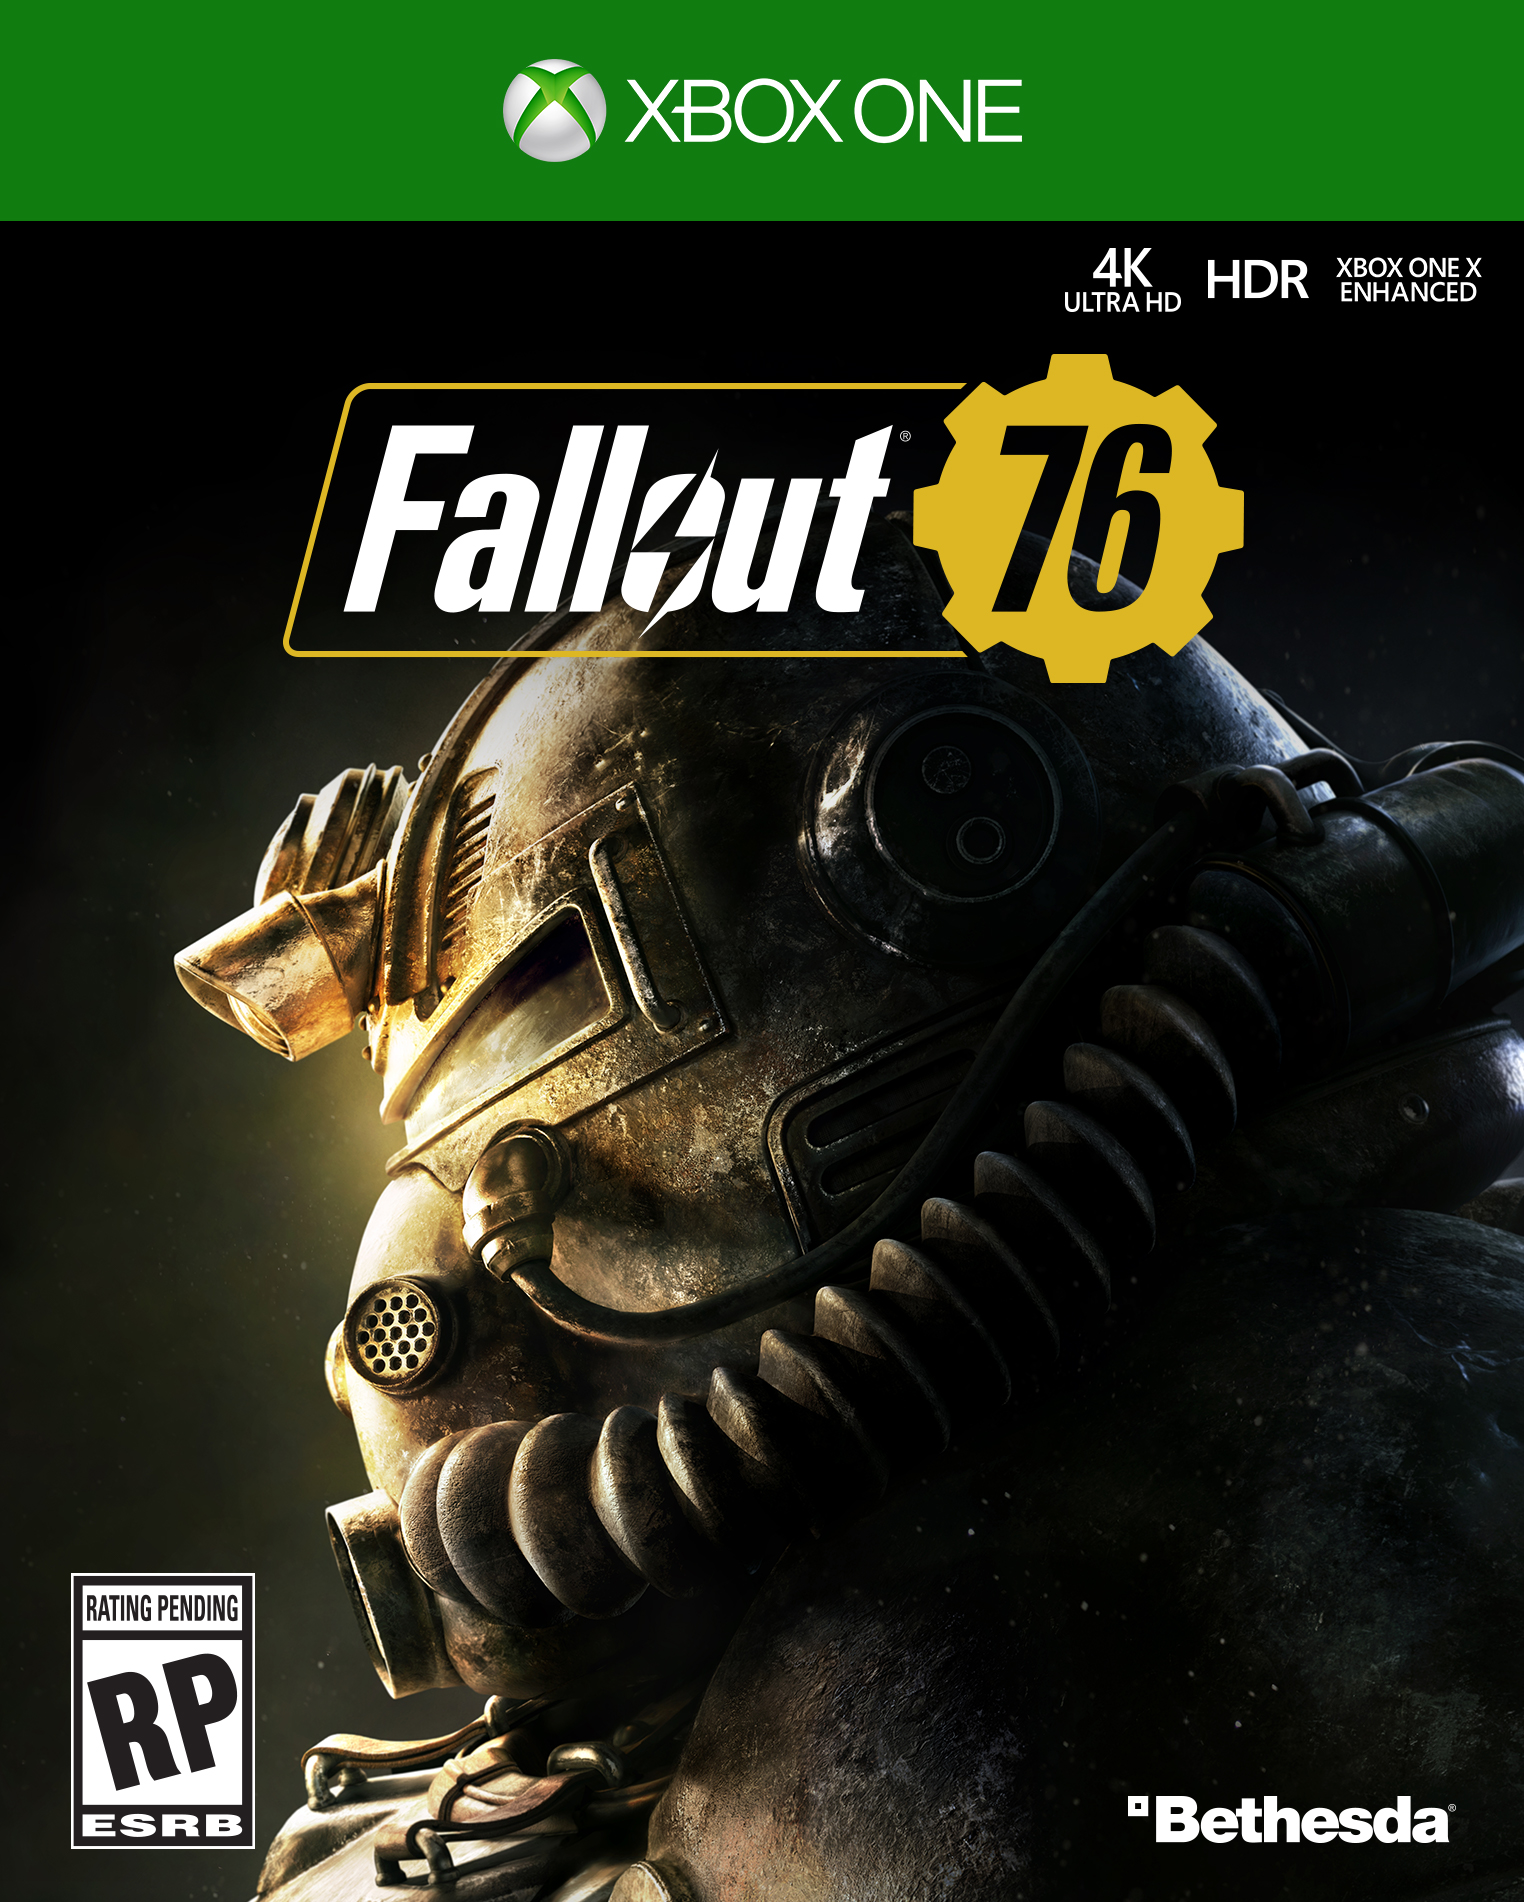 Fallout 76, Bethesda, Xbox One, 093155173040 - image 1 of 12